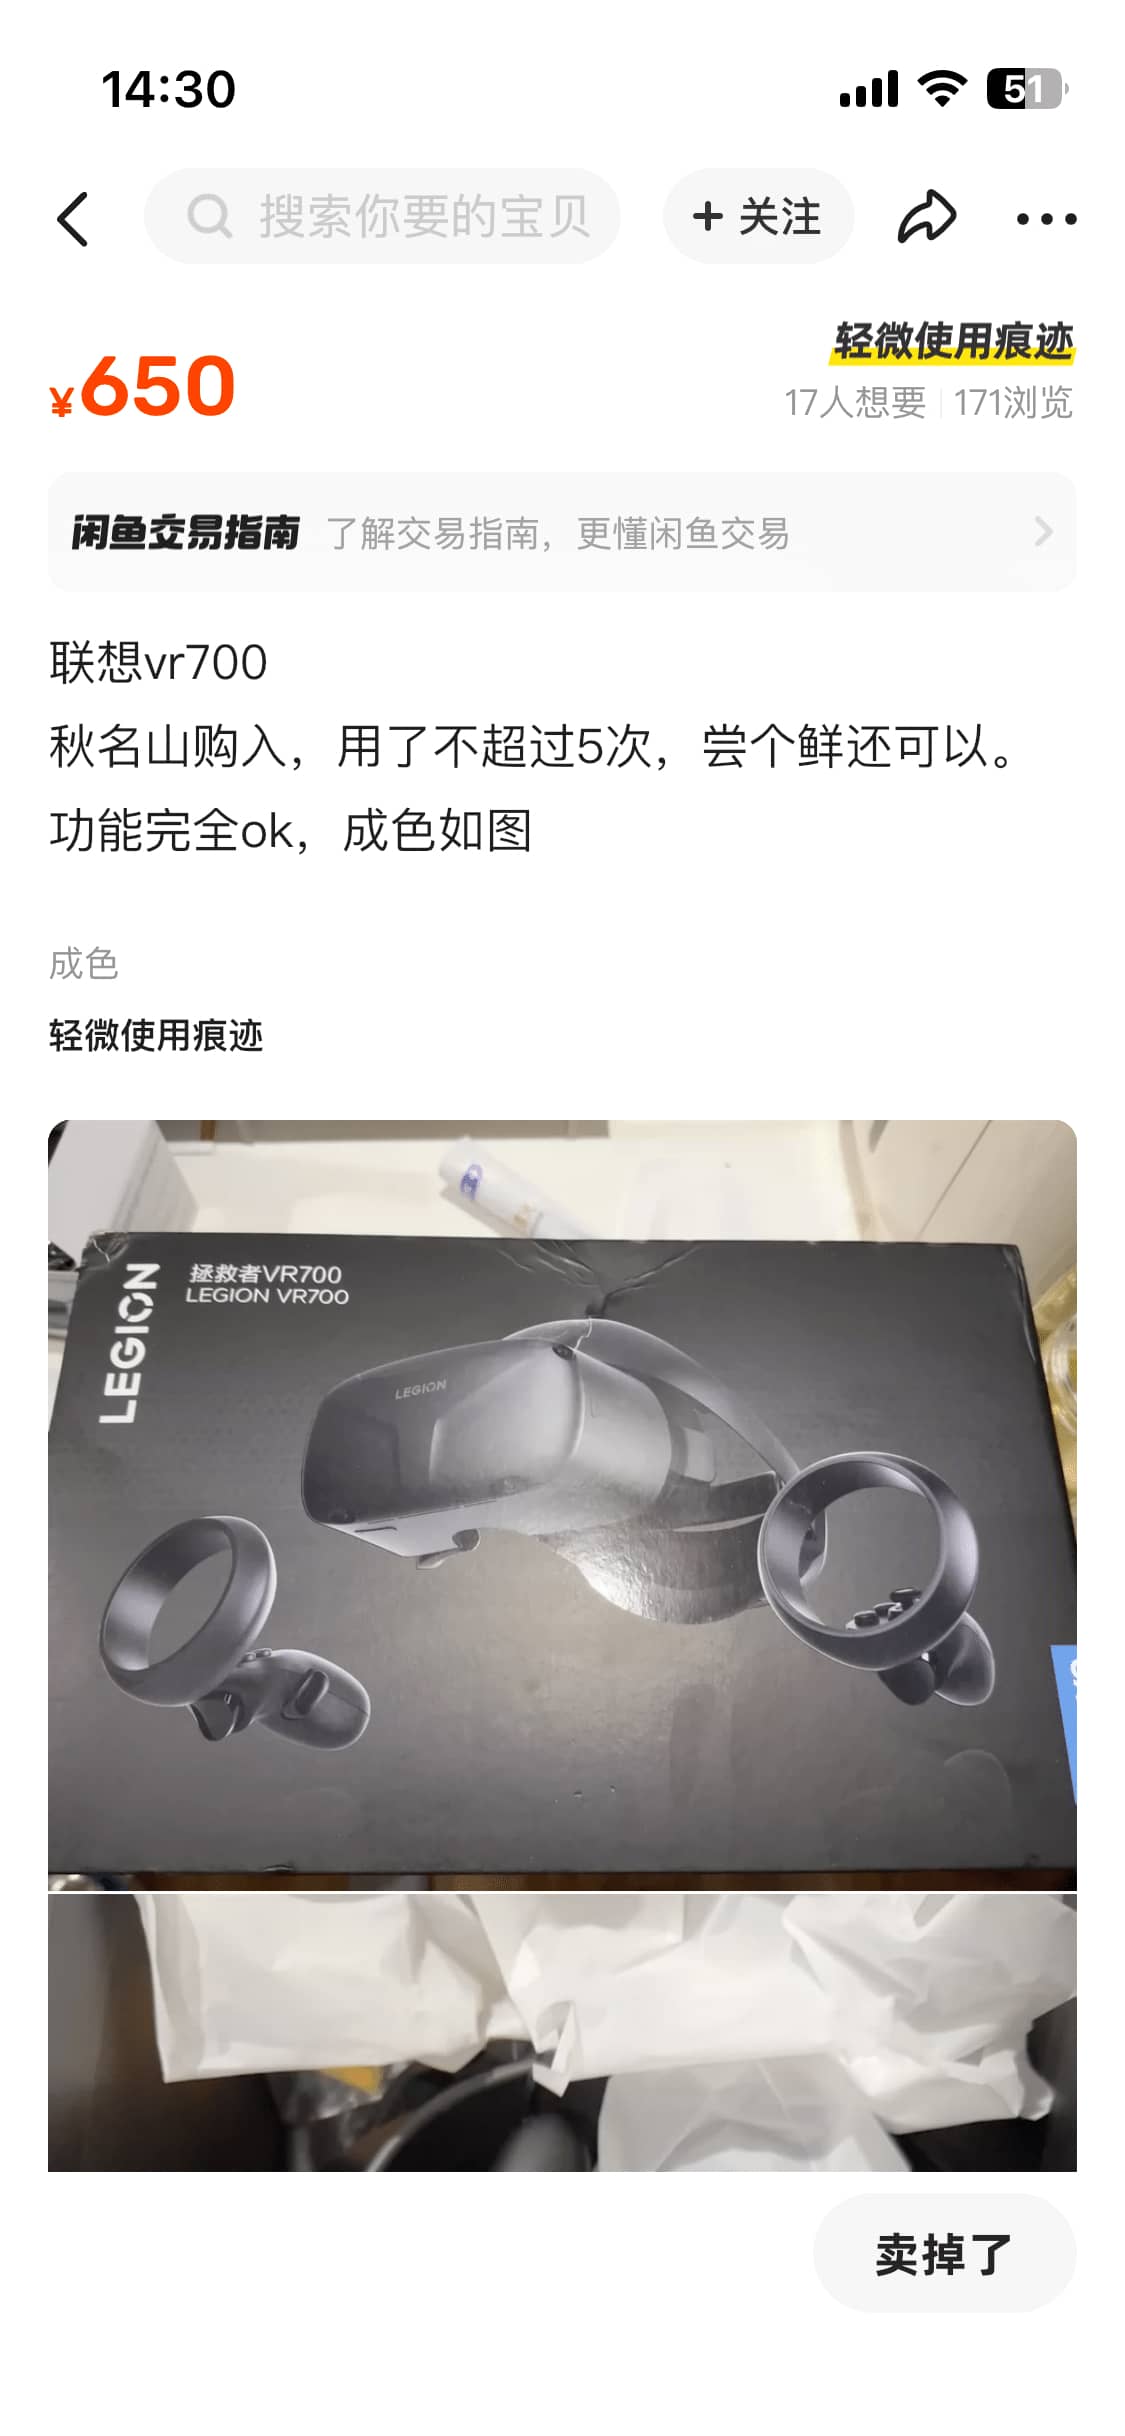  Relics of a very popular vr a few days ago, the rescuer vr700, exchange skin, iQIYI adventure Dream Pro